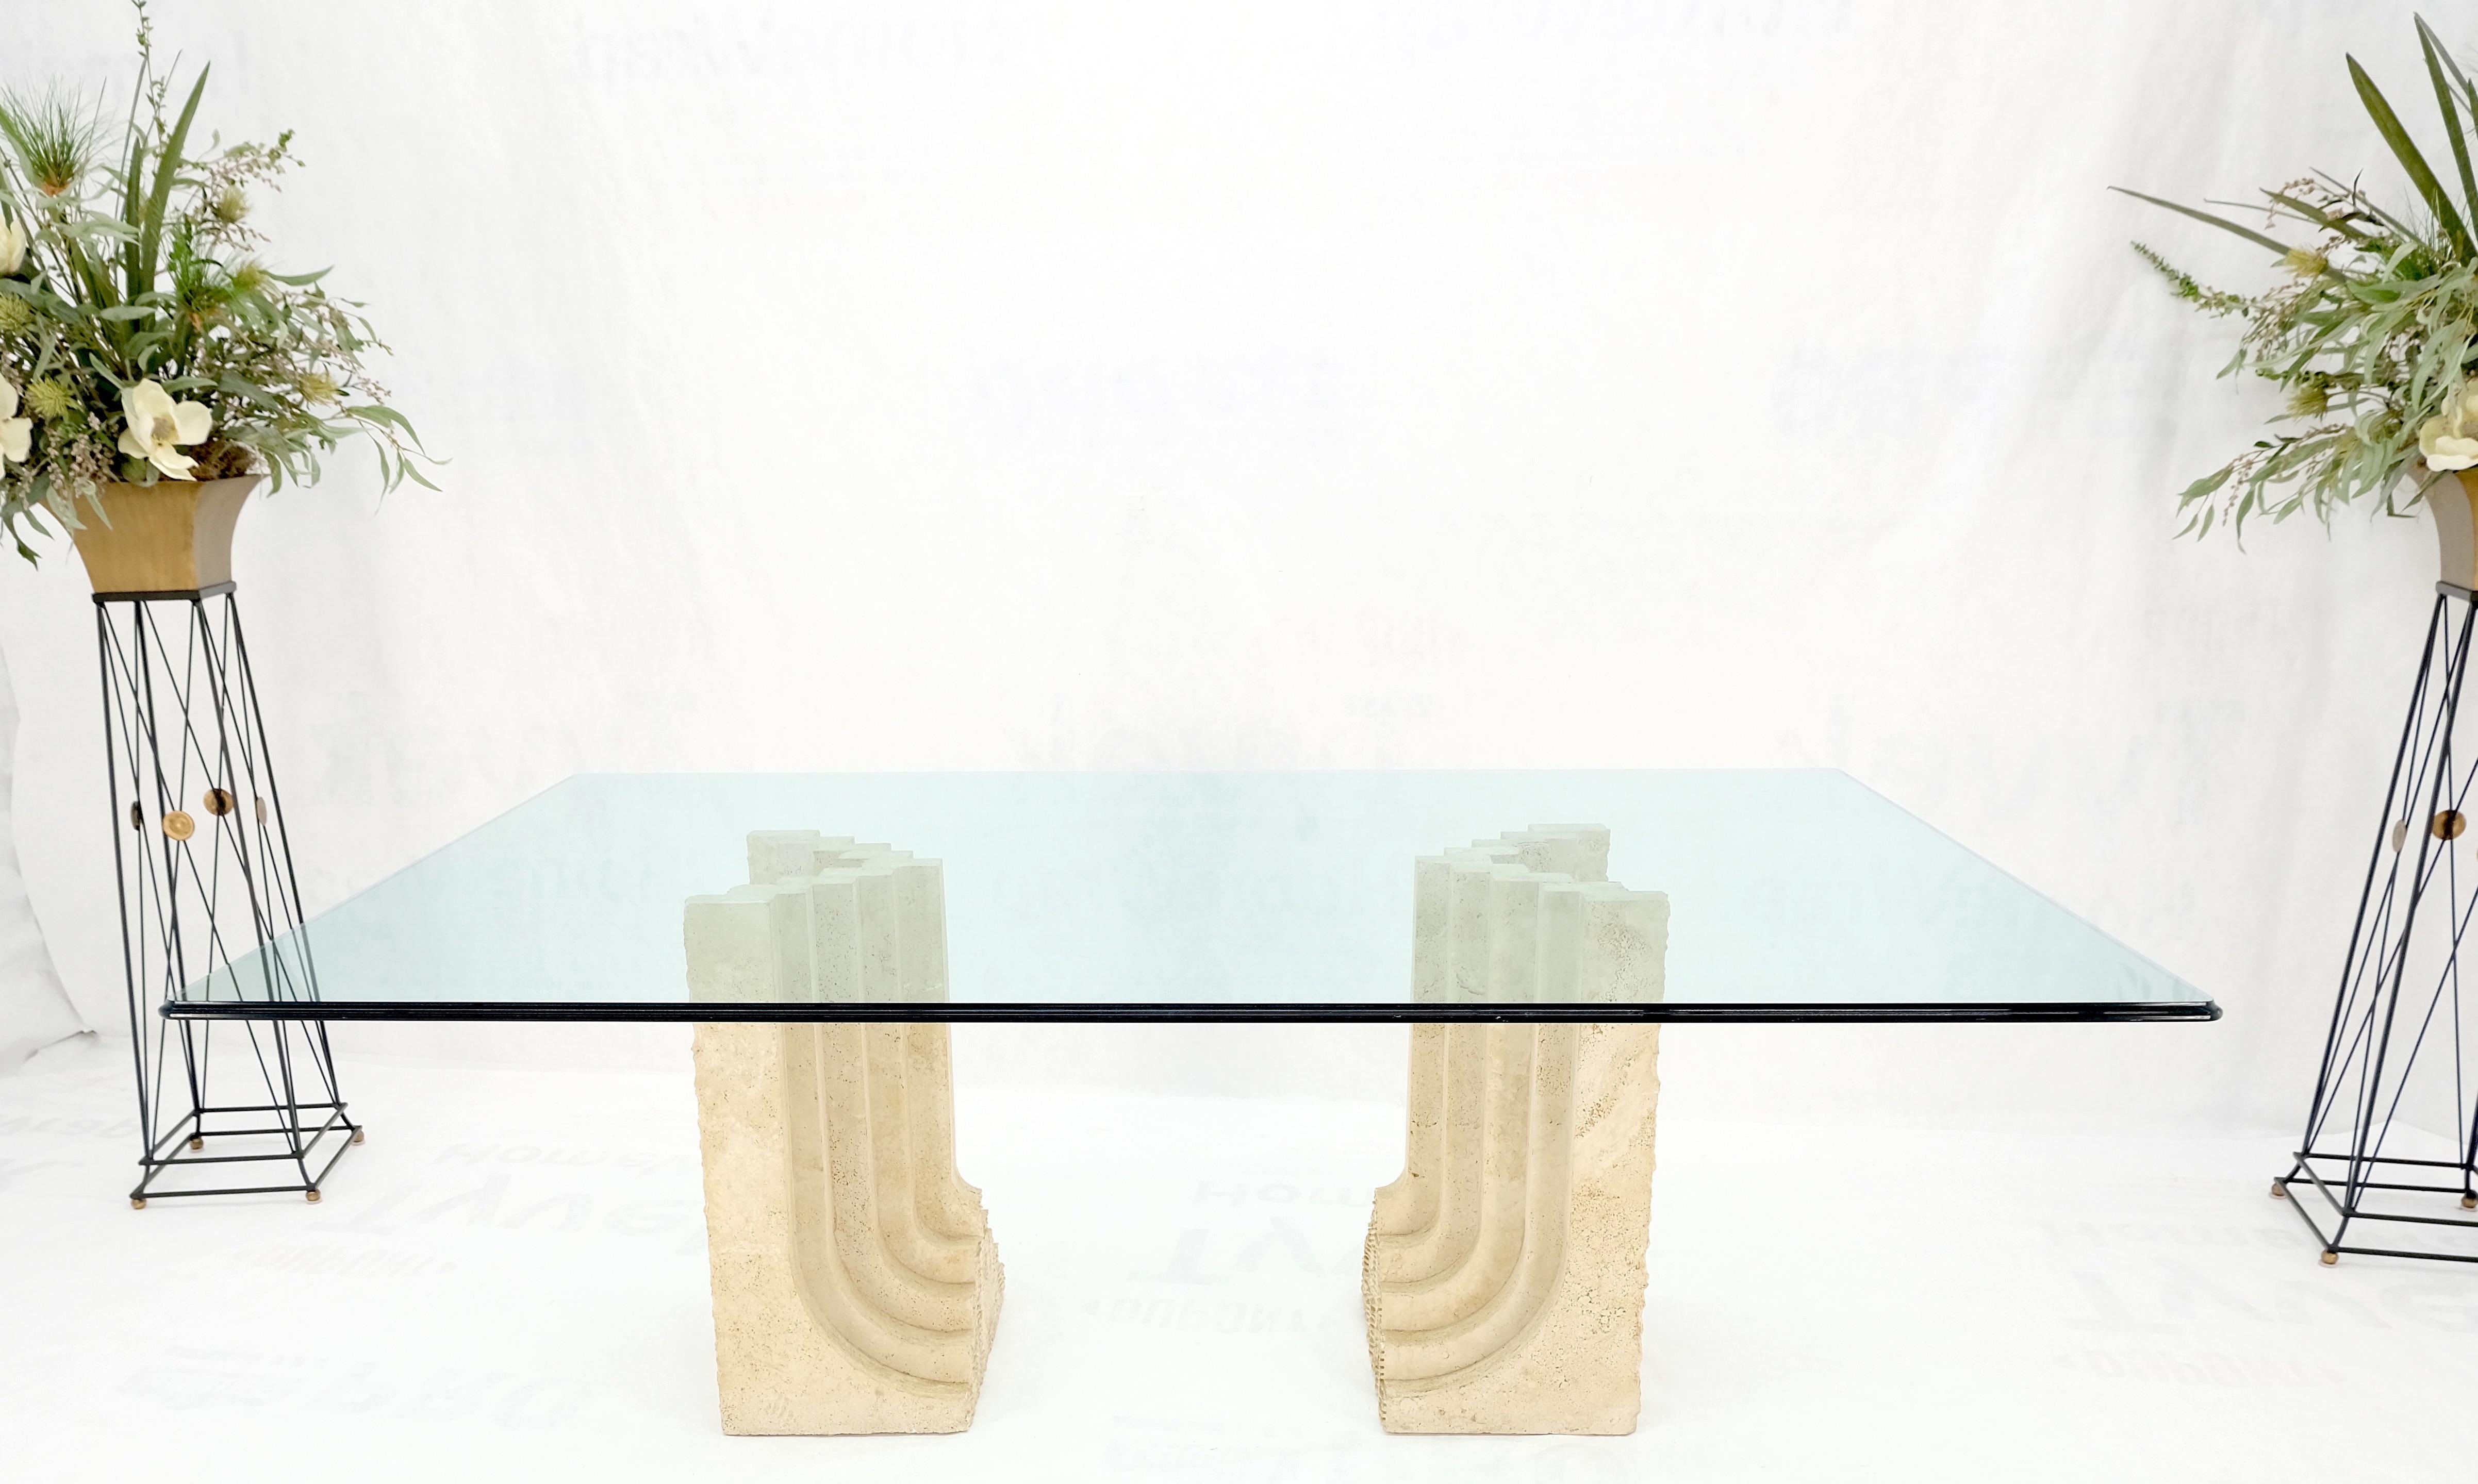 Large oversize wide rectangle shape glass top travertine dining conference table.
Double carved waterfall shape travertine pedestals base.